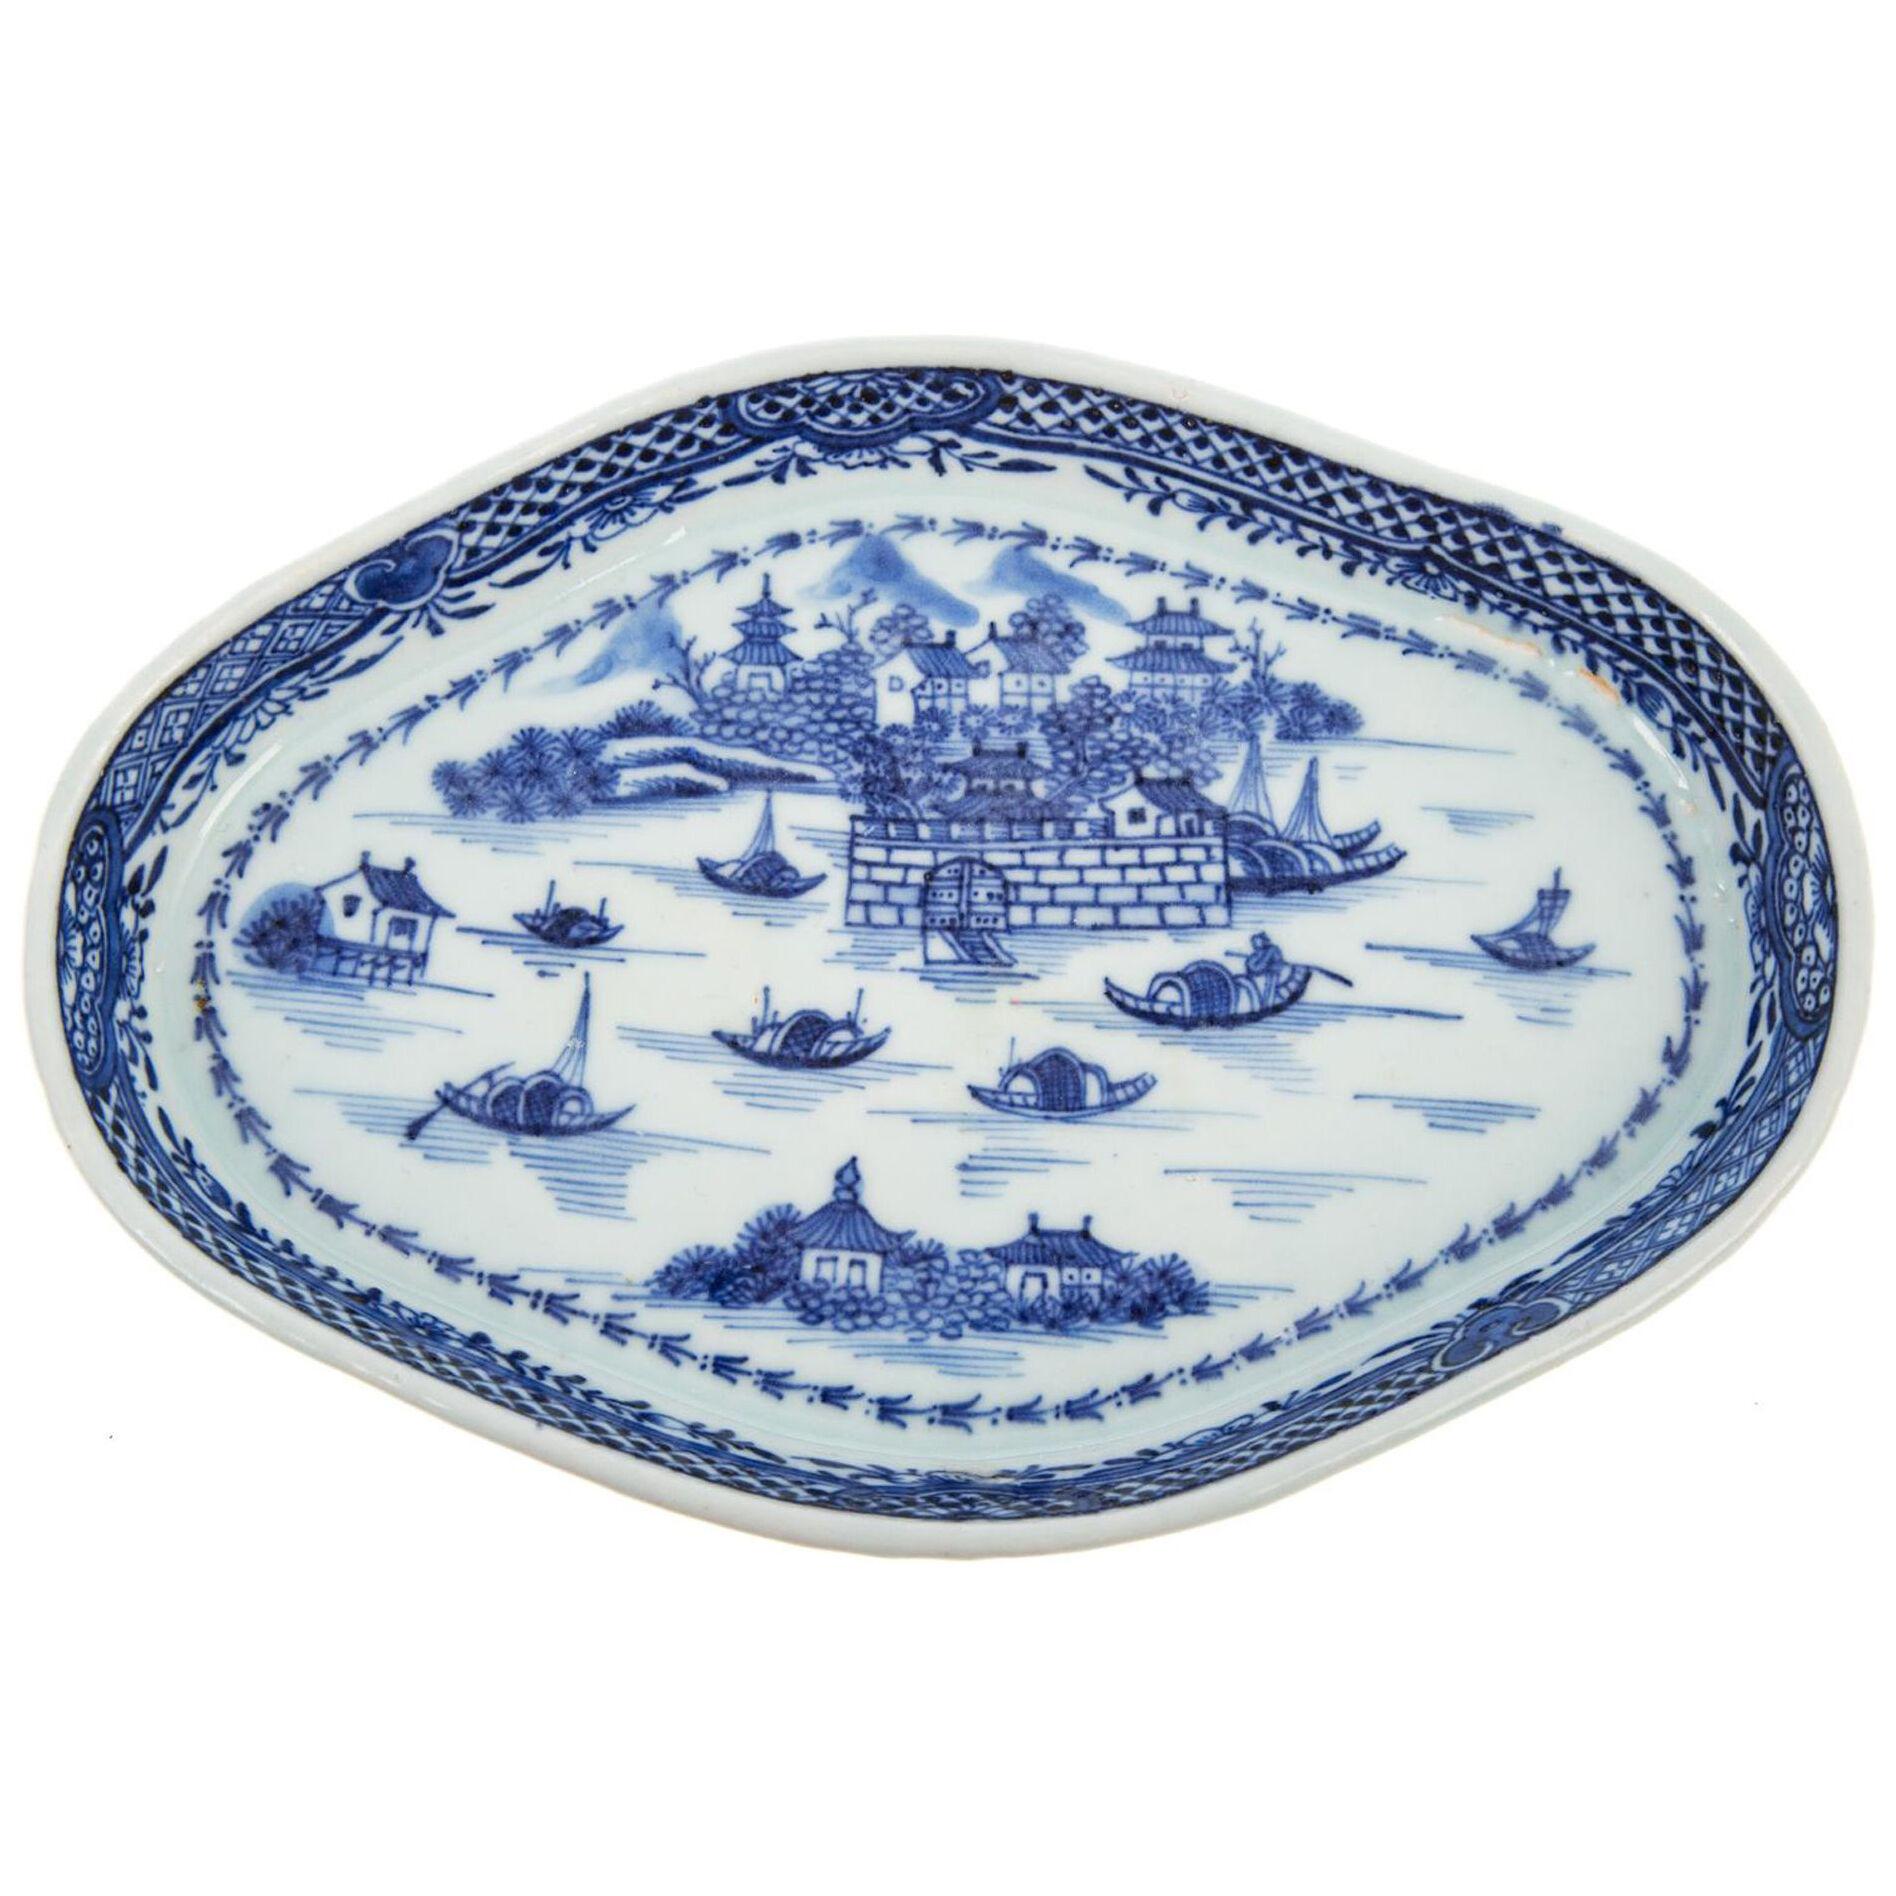 Chinese Export Porcelain Blue & White Spoon Tray with The Dutch Folly Fort